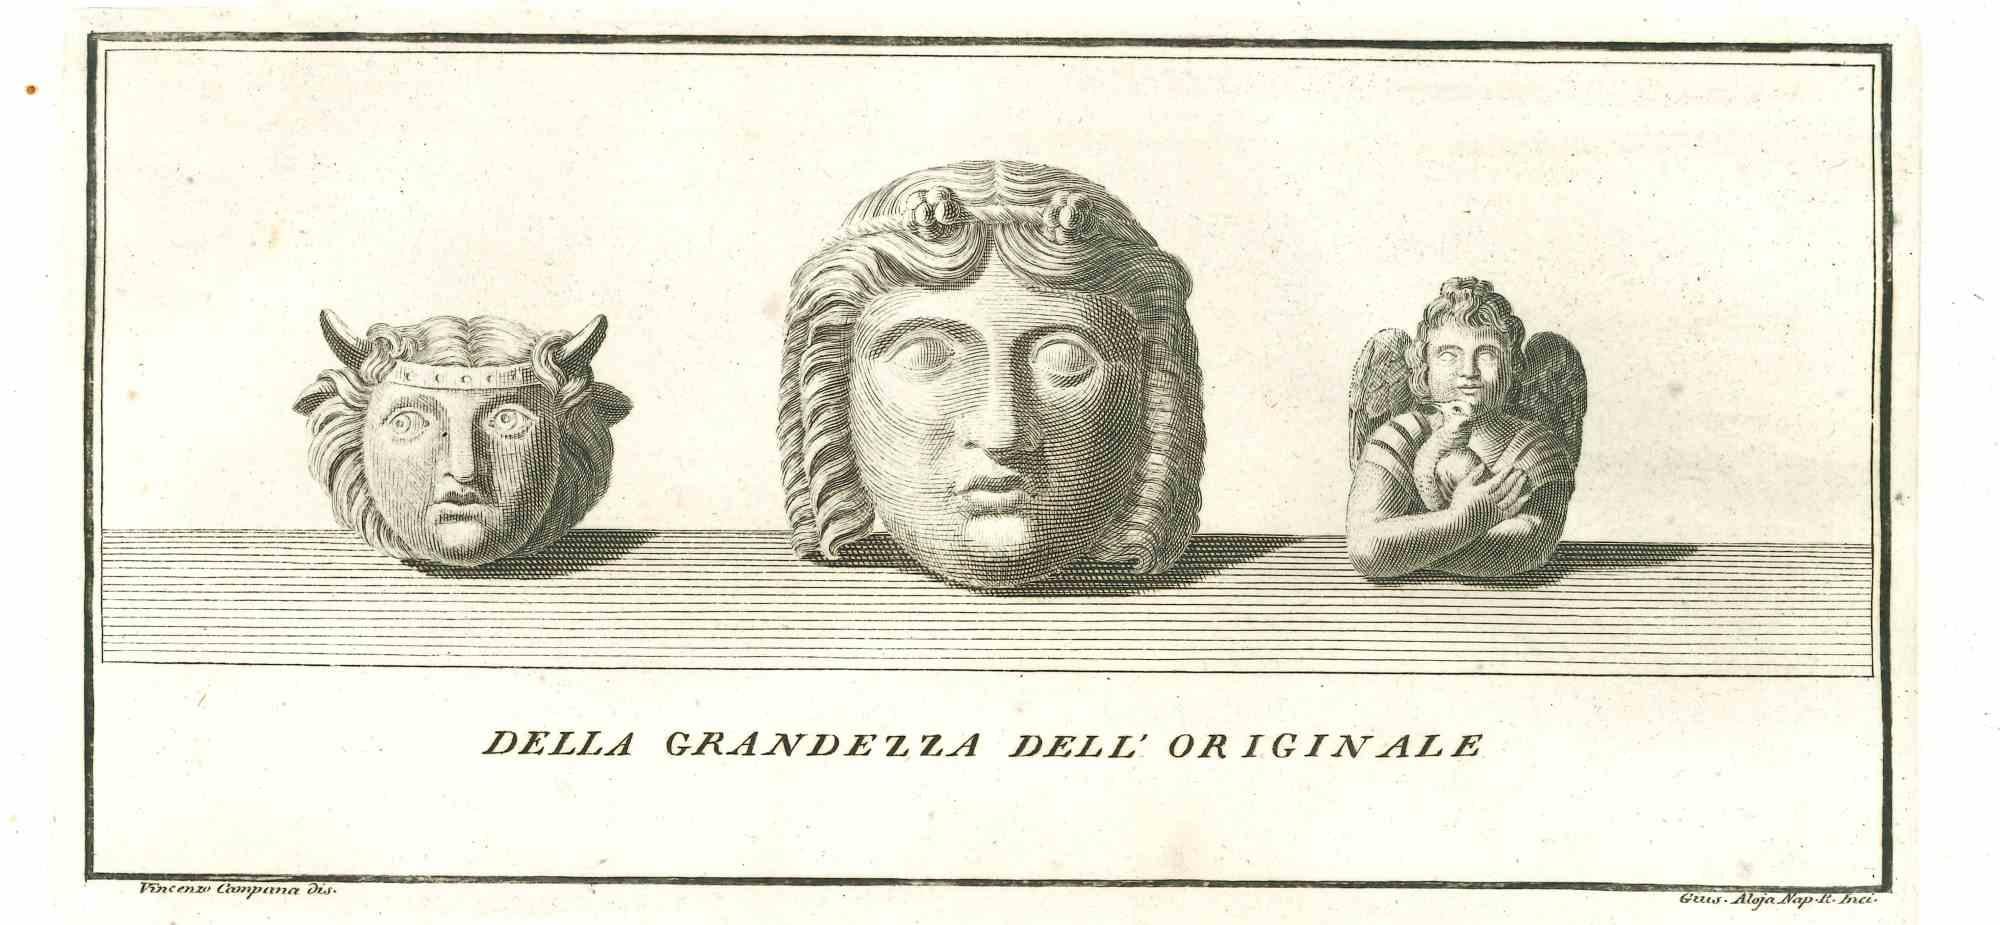 Ancient Roman Statues, from the series "Antiquities of Herculaneum", is an original etching on paper realized from a design by Vincenzo Campana in the 18th century.

Signed on the plate.

Good conditions.

The etching belongs to the print suite